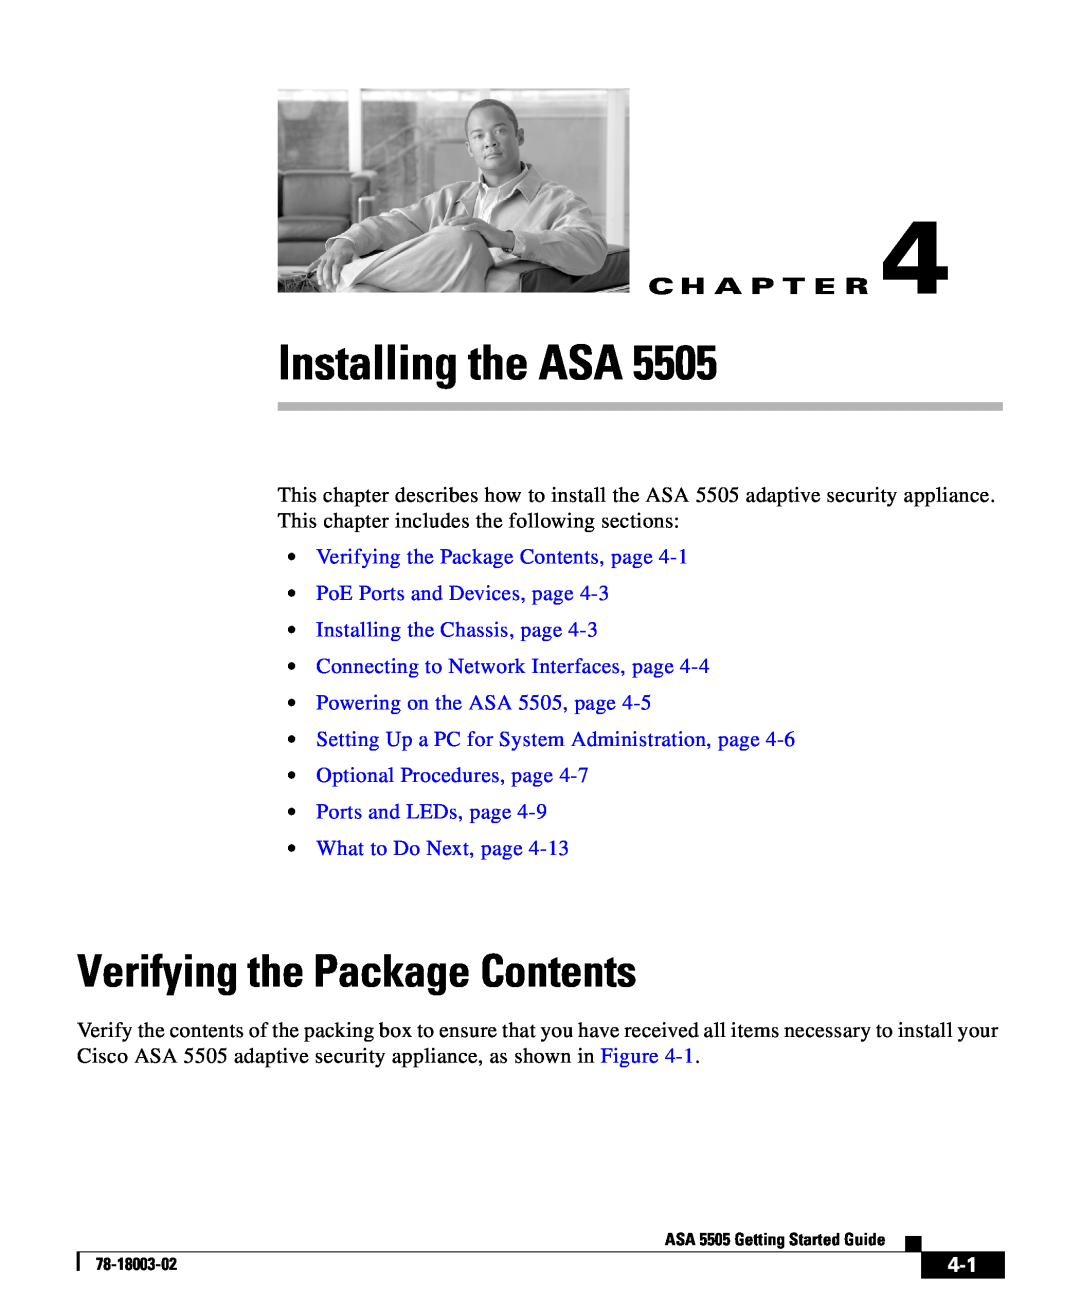 Cisco Systems 5505 quick start Verifying the Package Contents, Installing the Chassis, Launching ASDM 